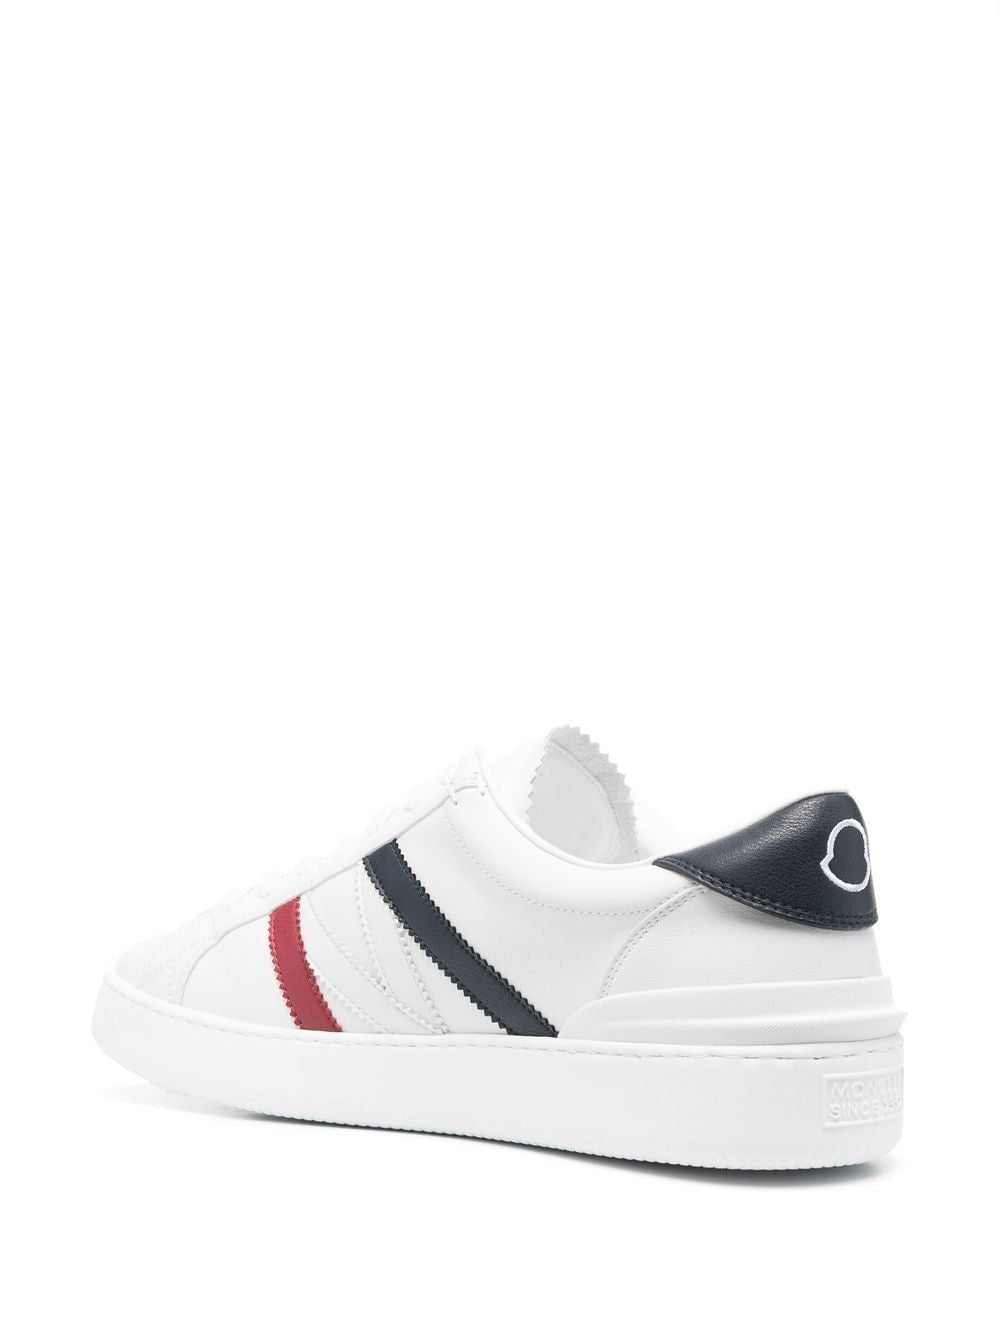 MONCLER White Leather Trainers for Men with Red and Blue Accents and Logo Detail